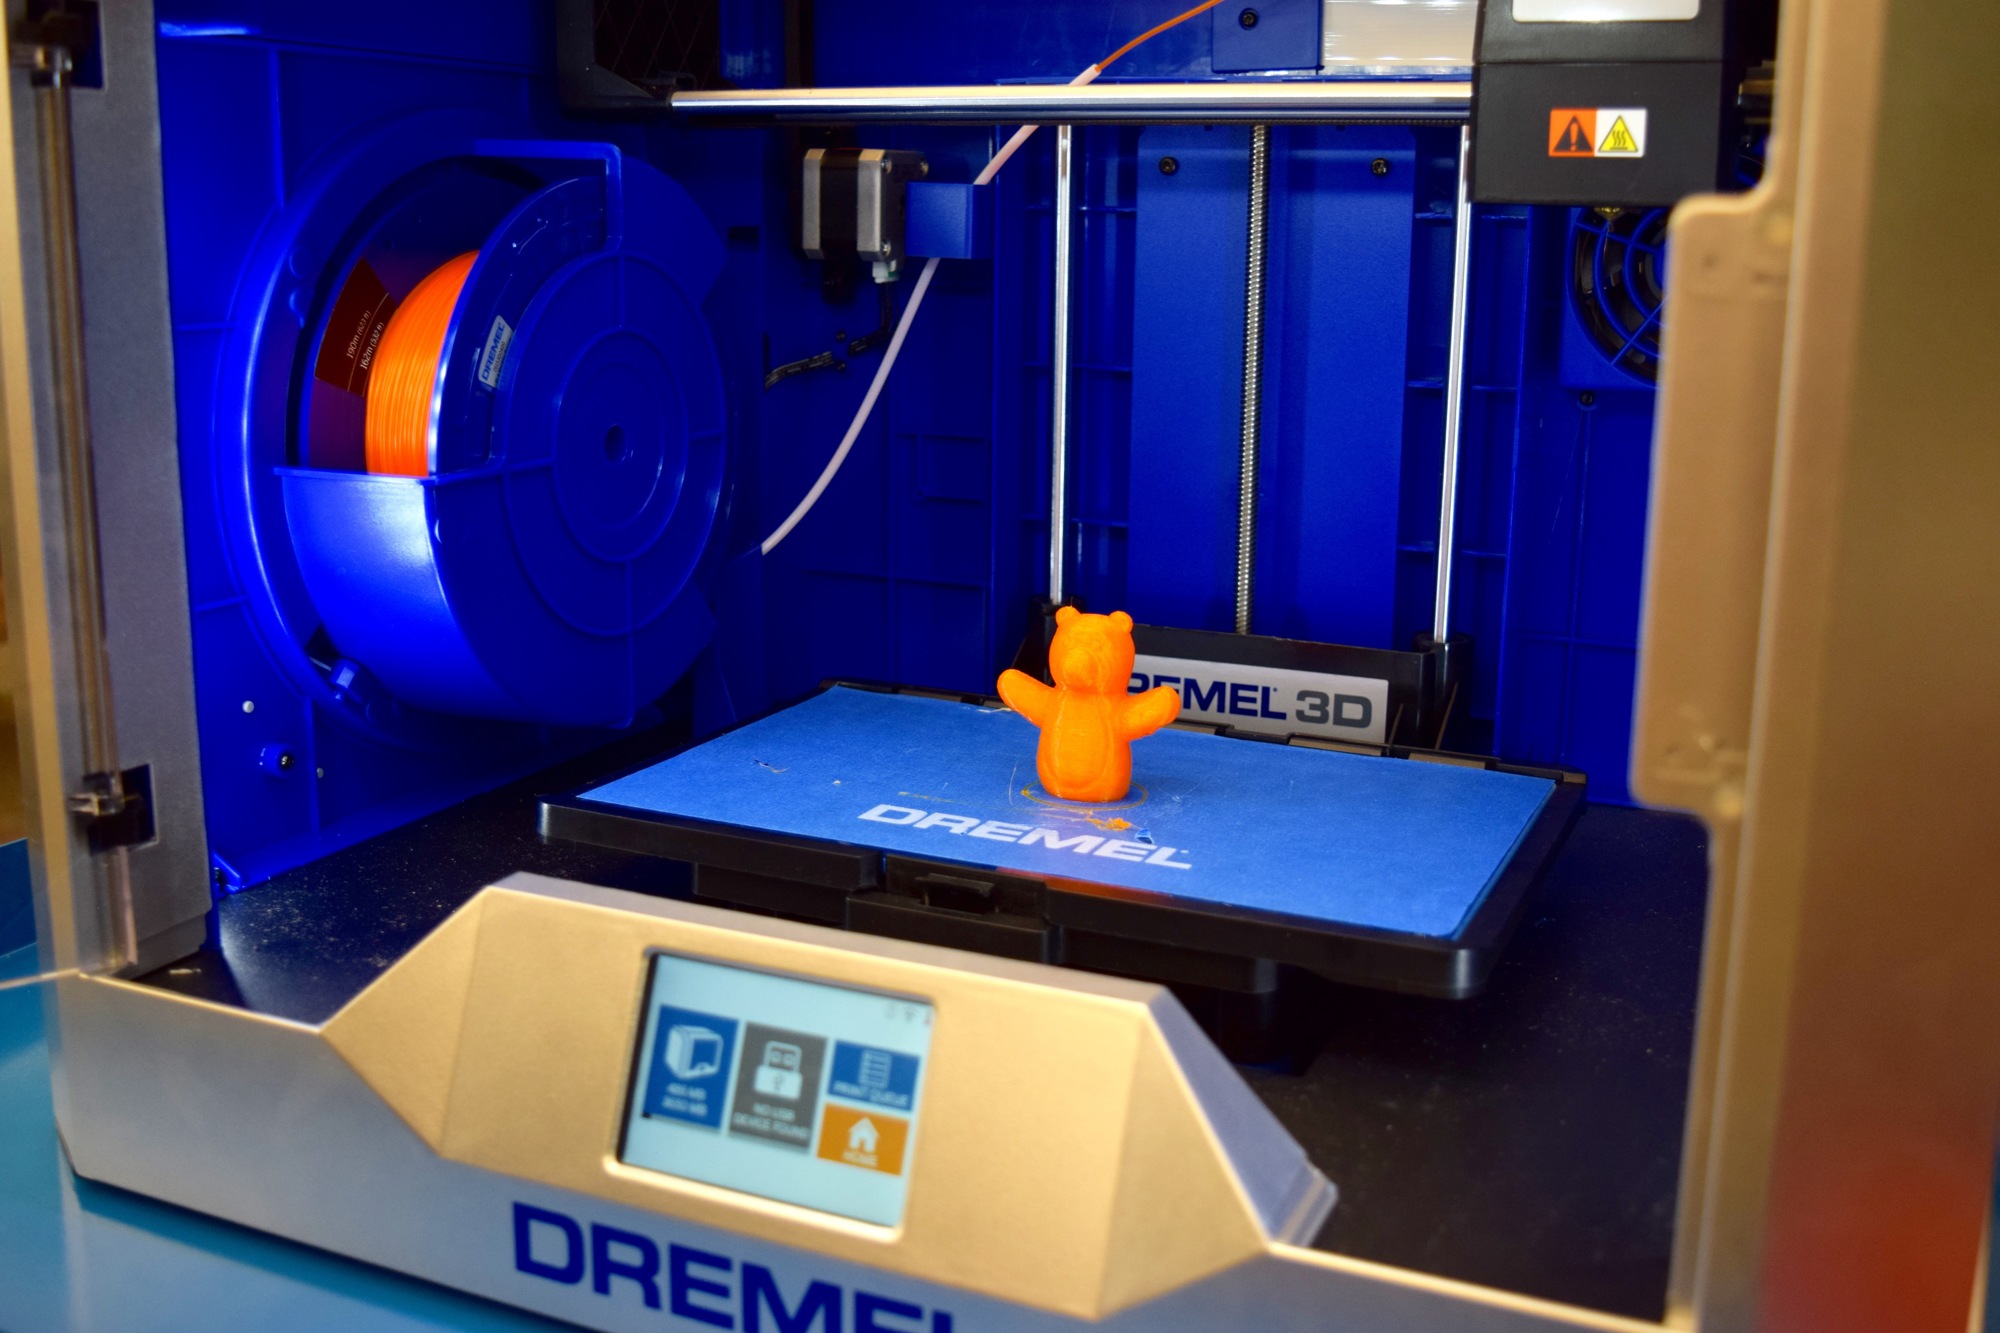 One of the sample objects the Dremel printer produced is a bear-shaped finger puppet.